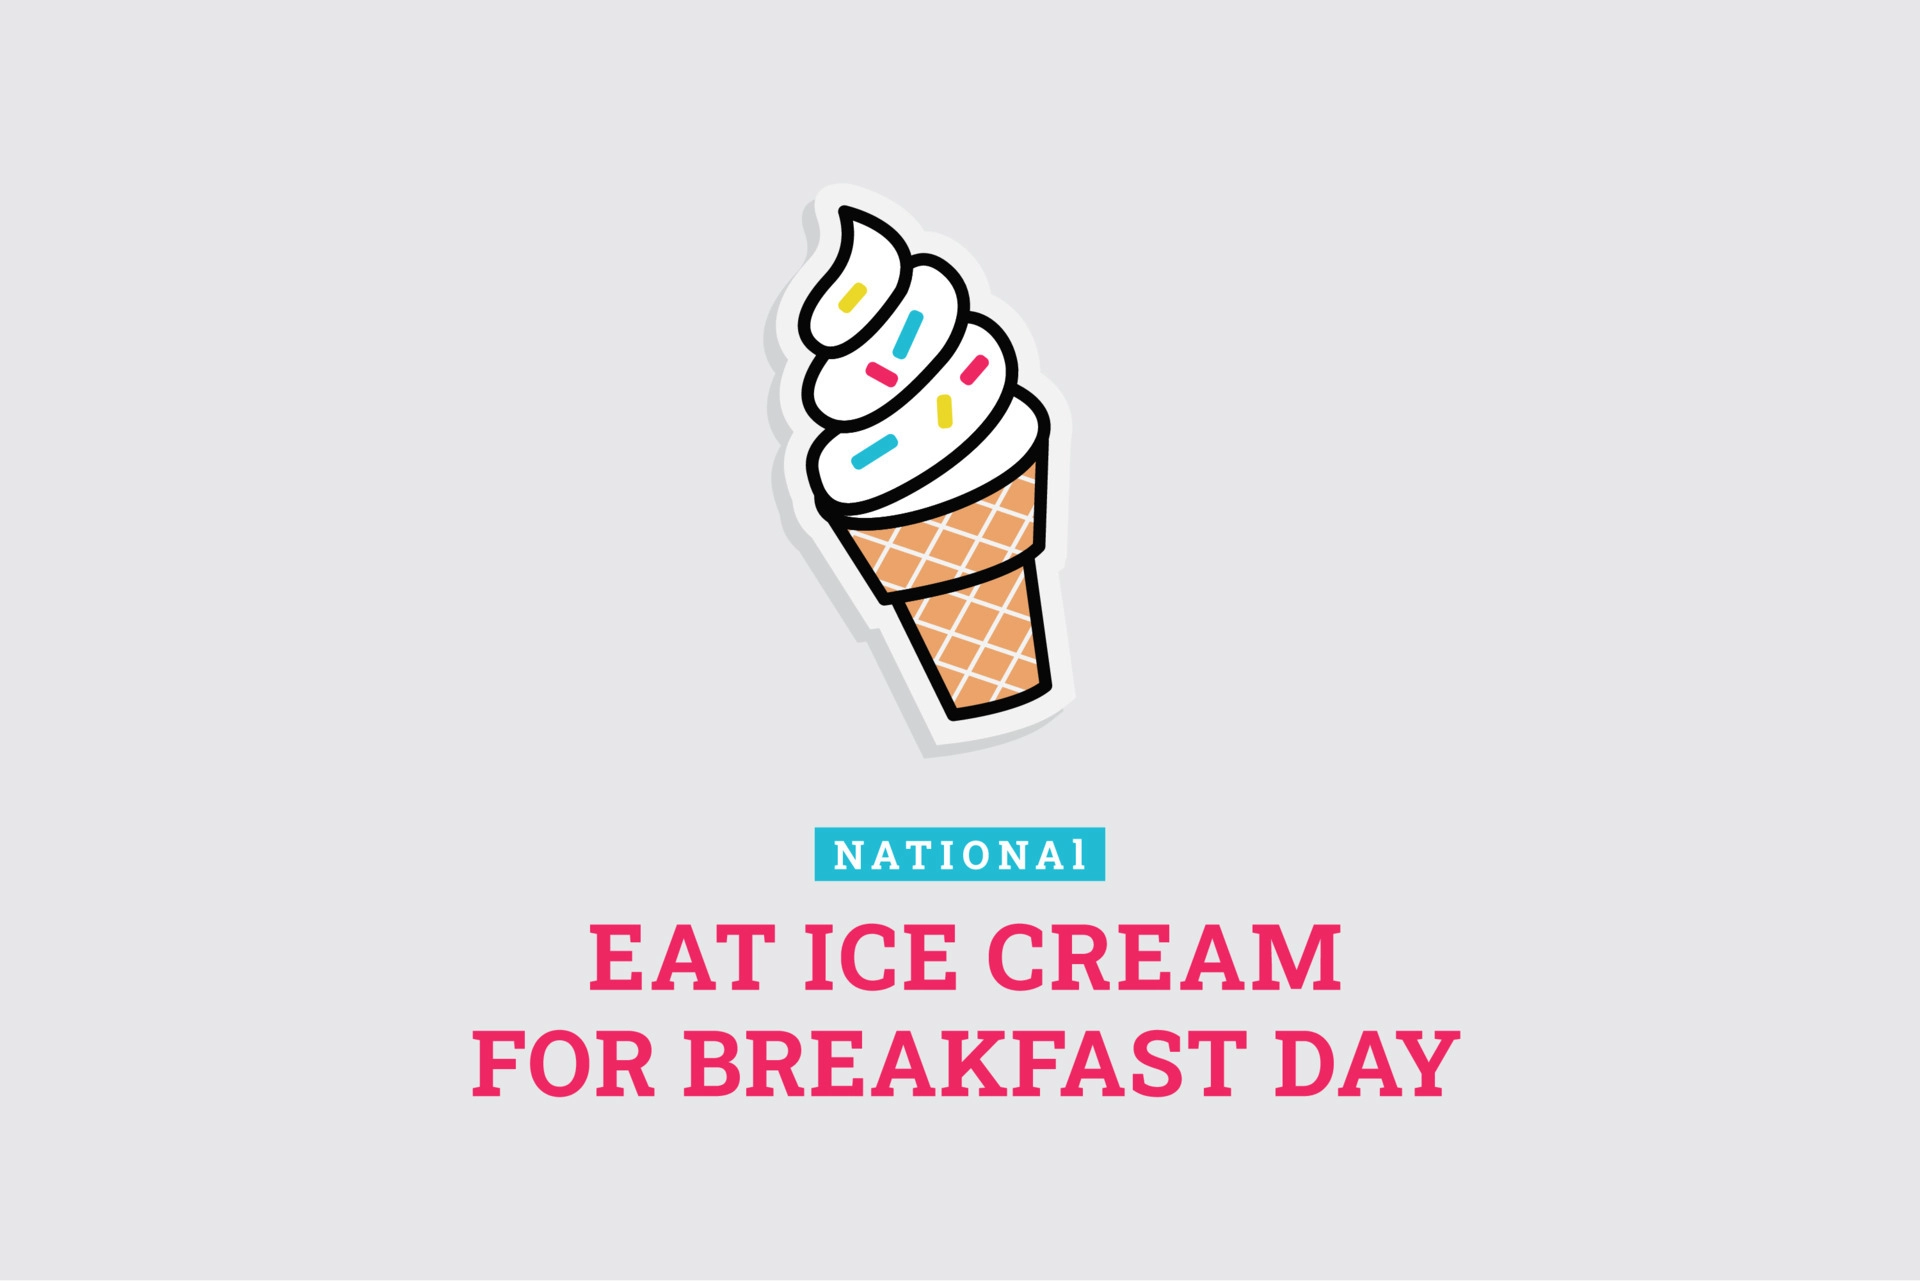 National Eat Ice Cream for Breakfast Day